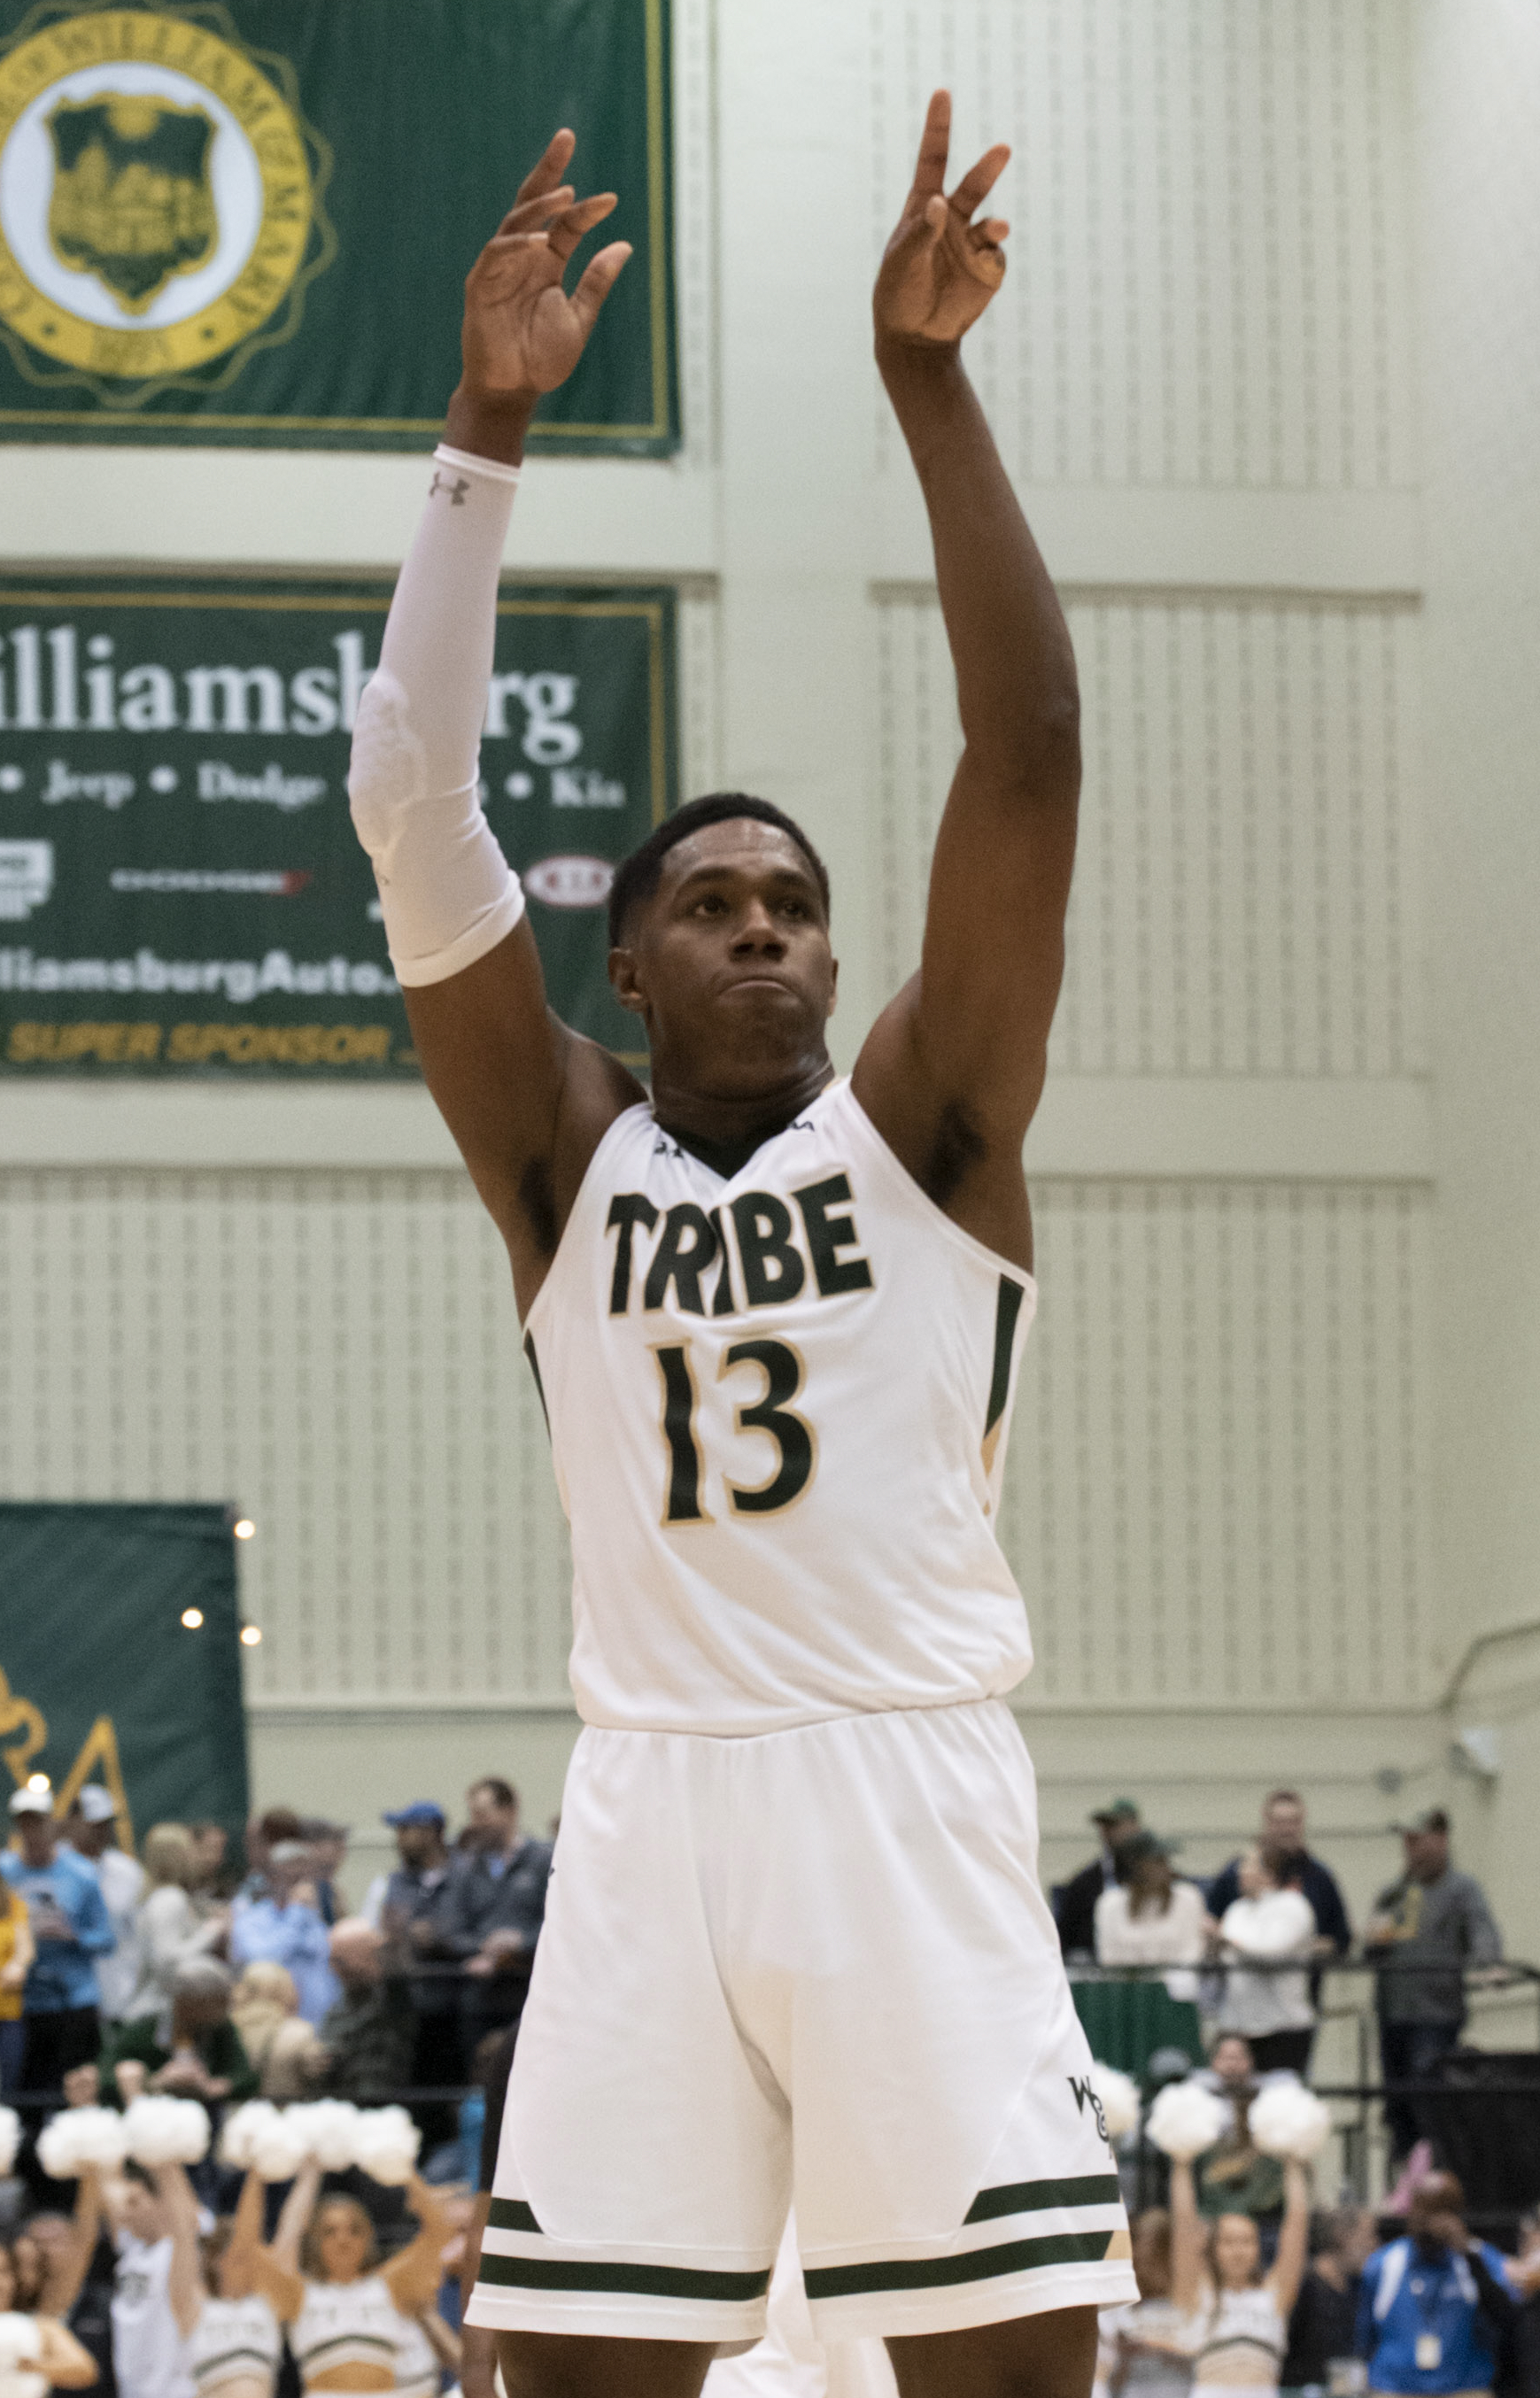 W&M's Nathan Knight Makes NBA Debut - William & Mary Athletics